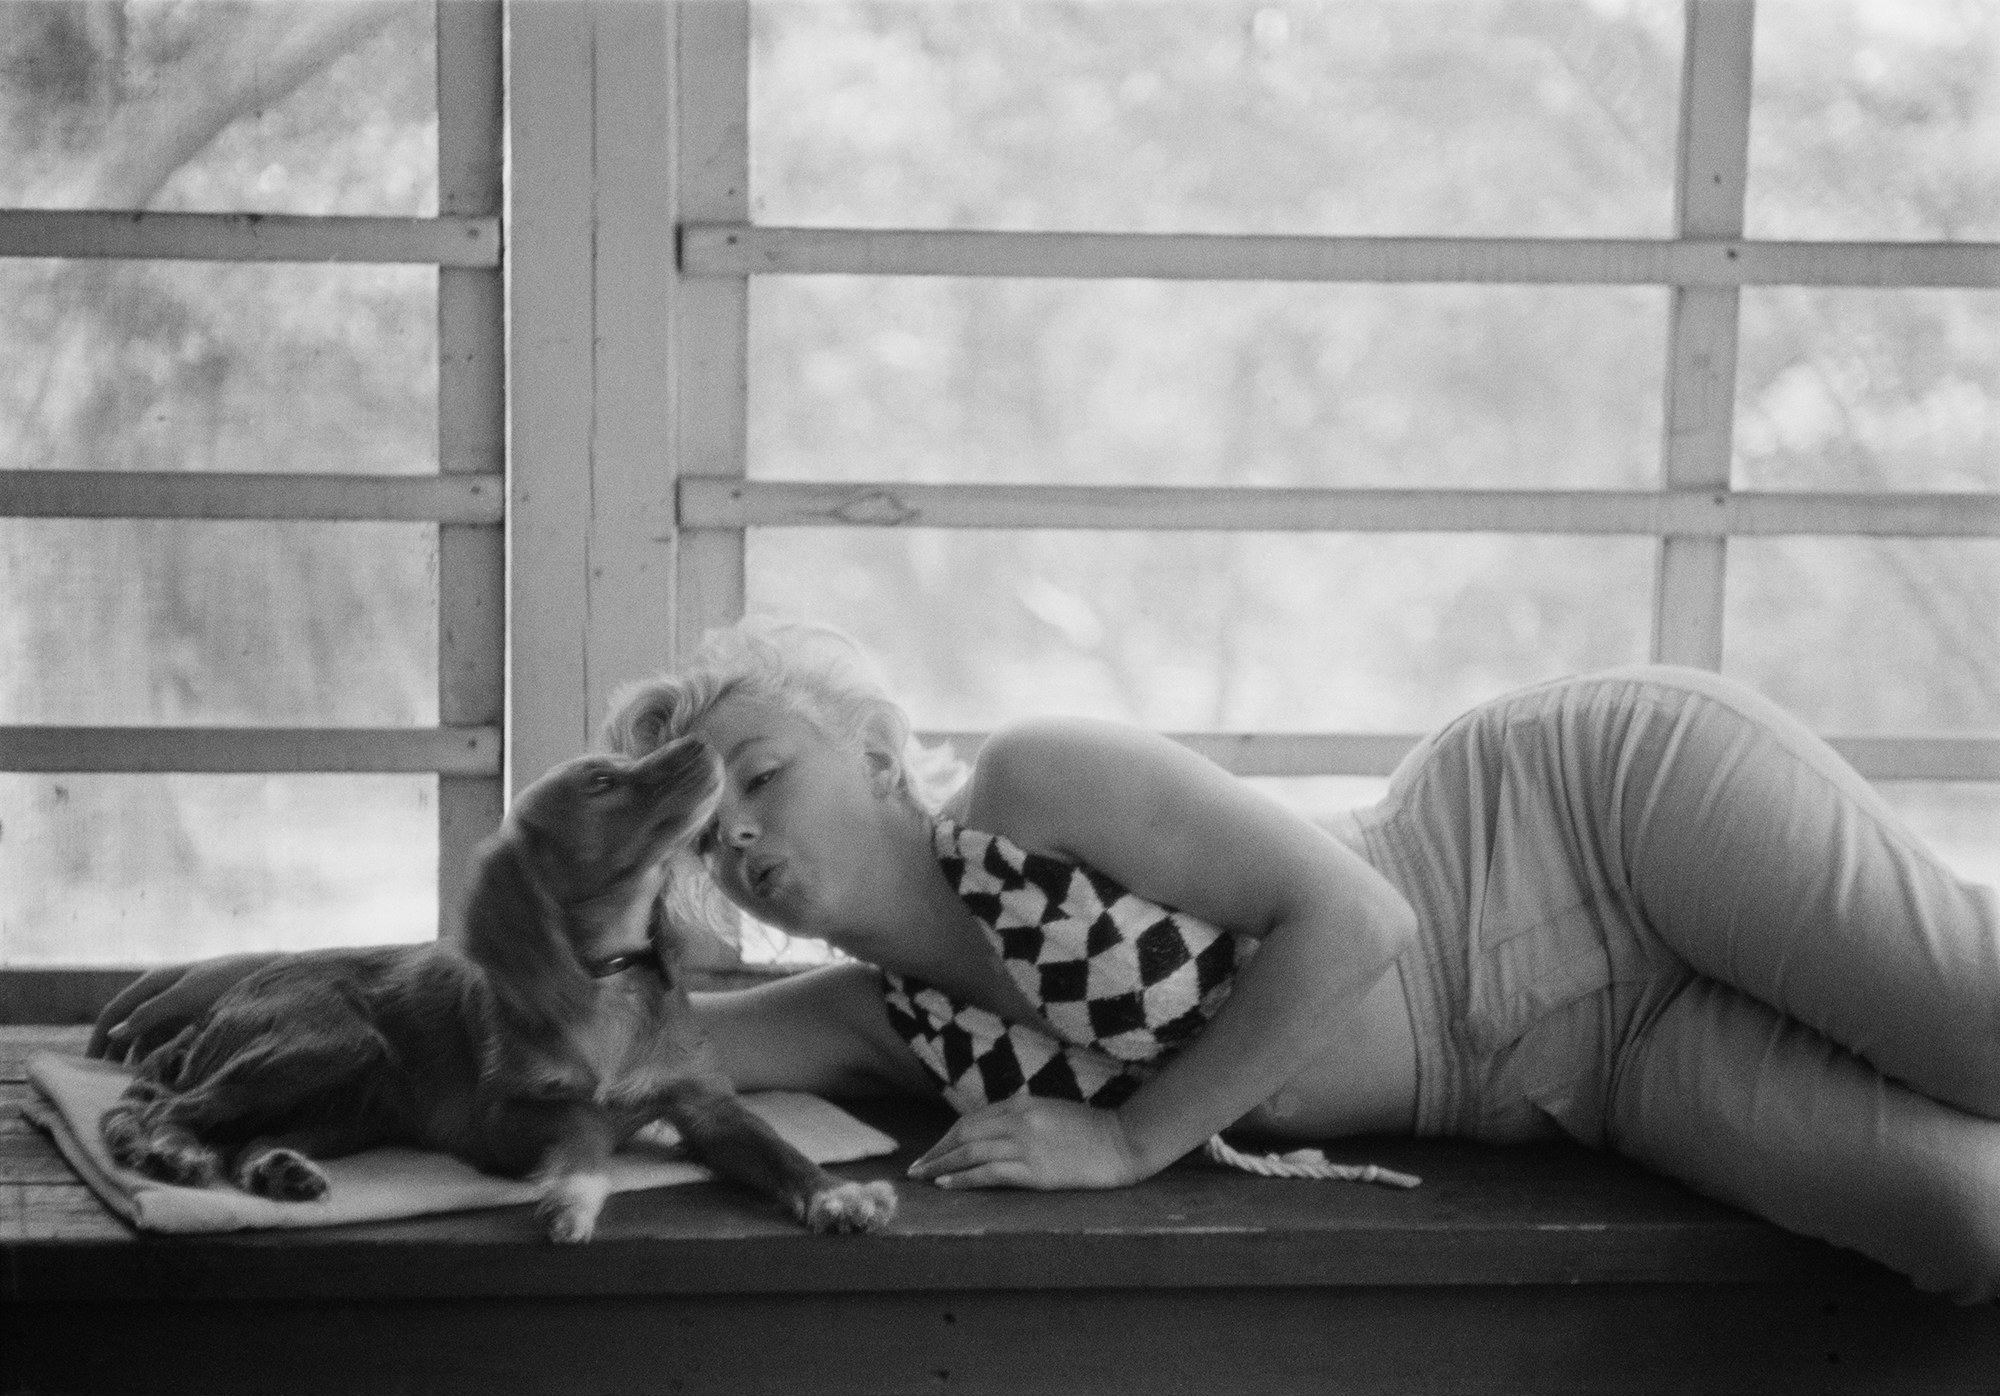 Marilyn Monroe playing with a dog lying next to a window